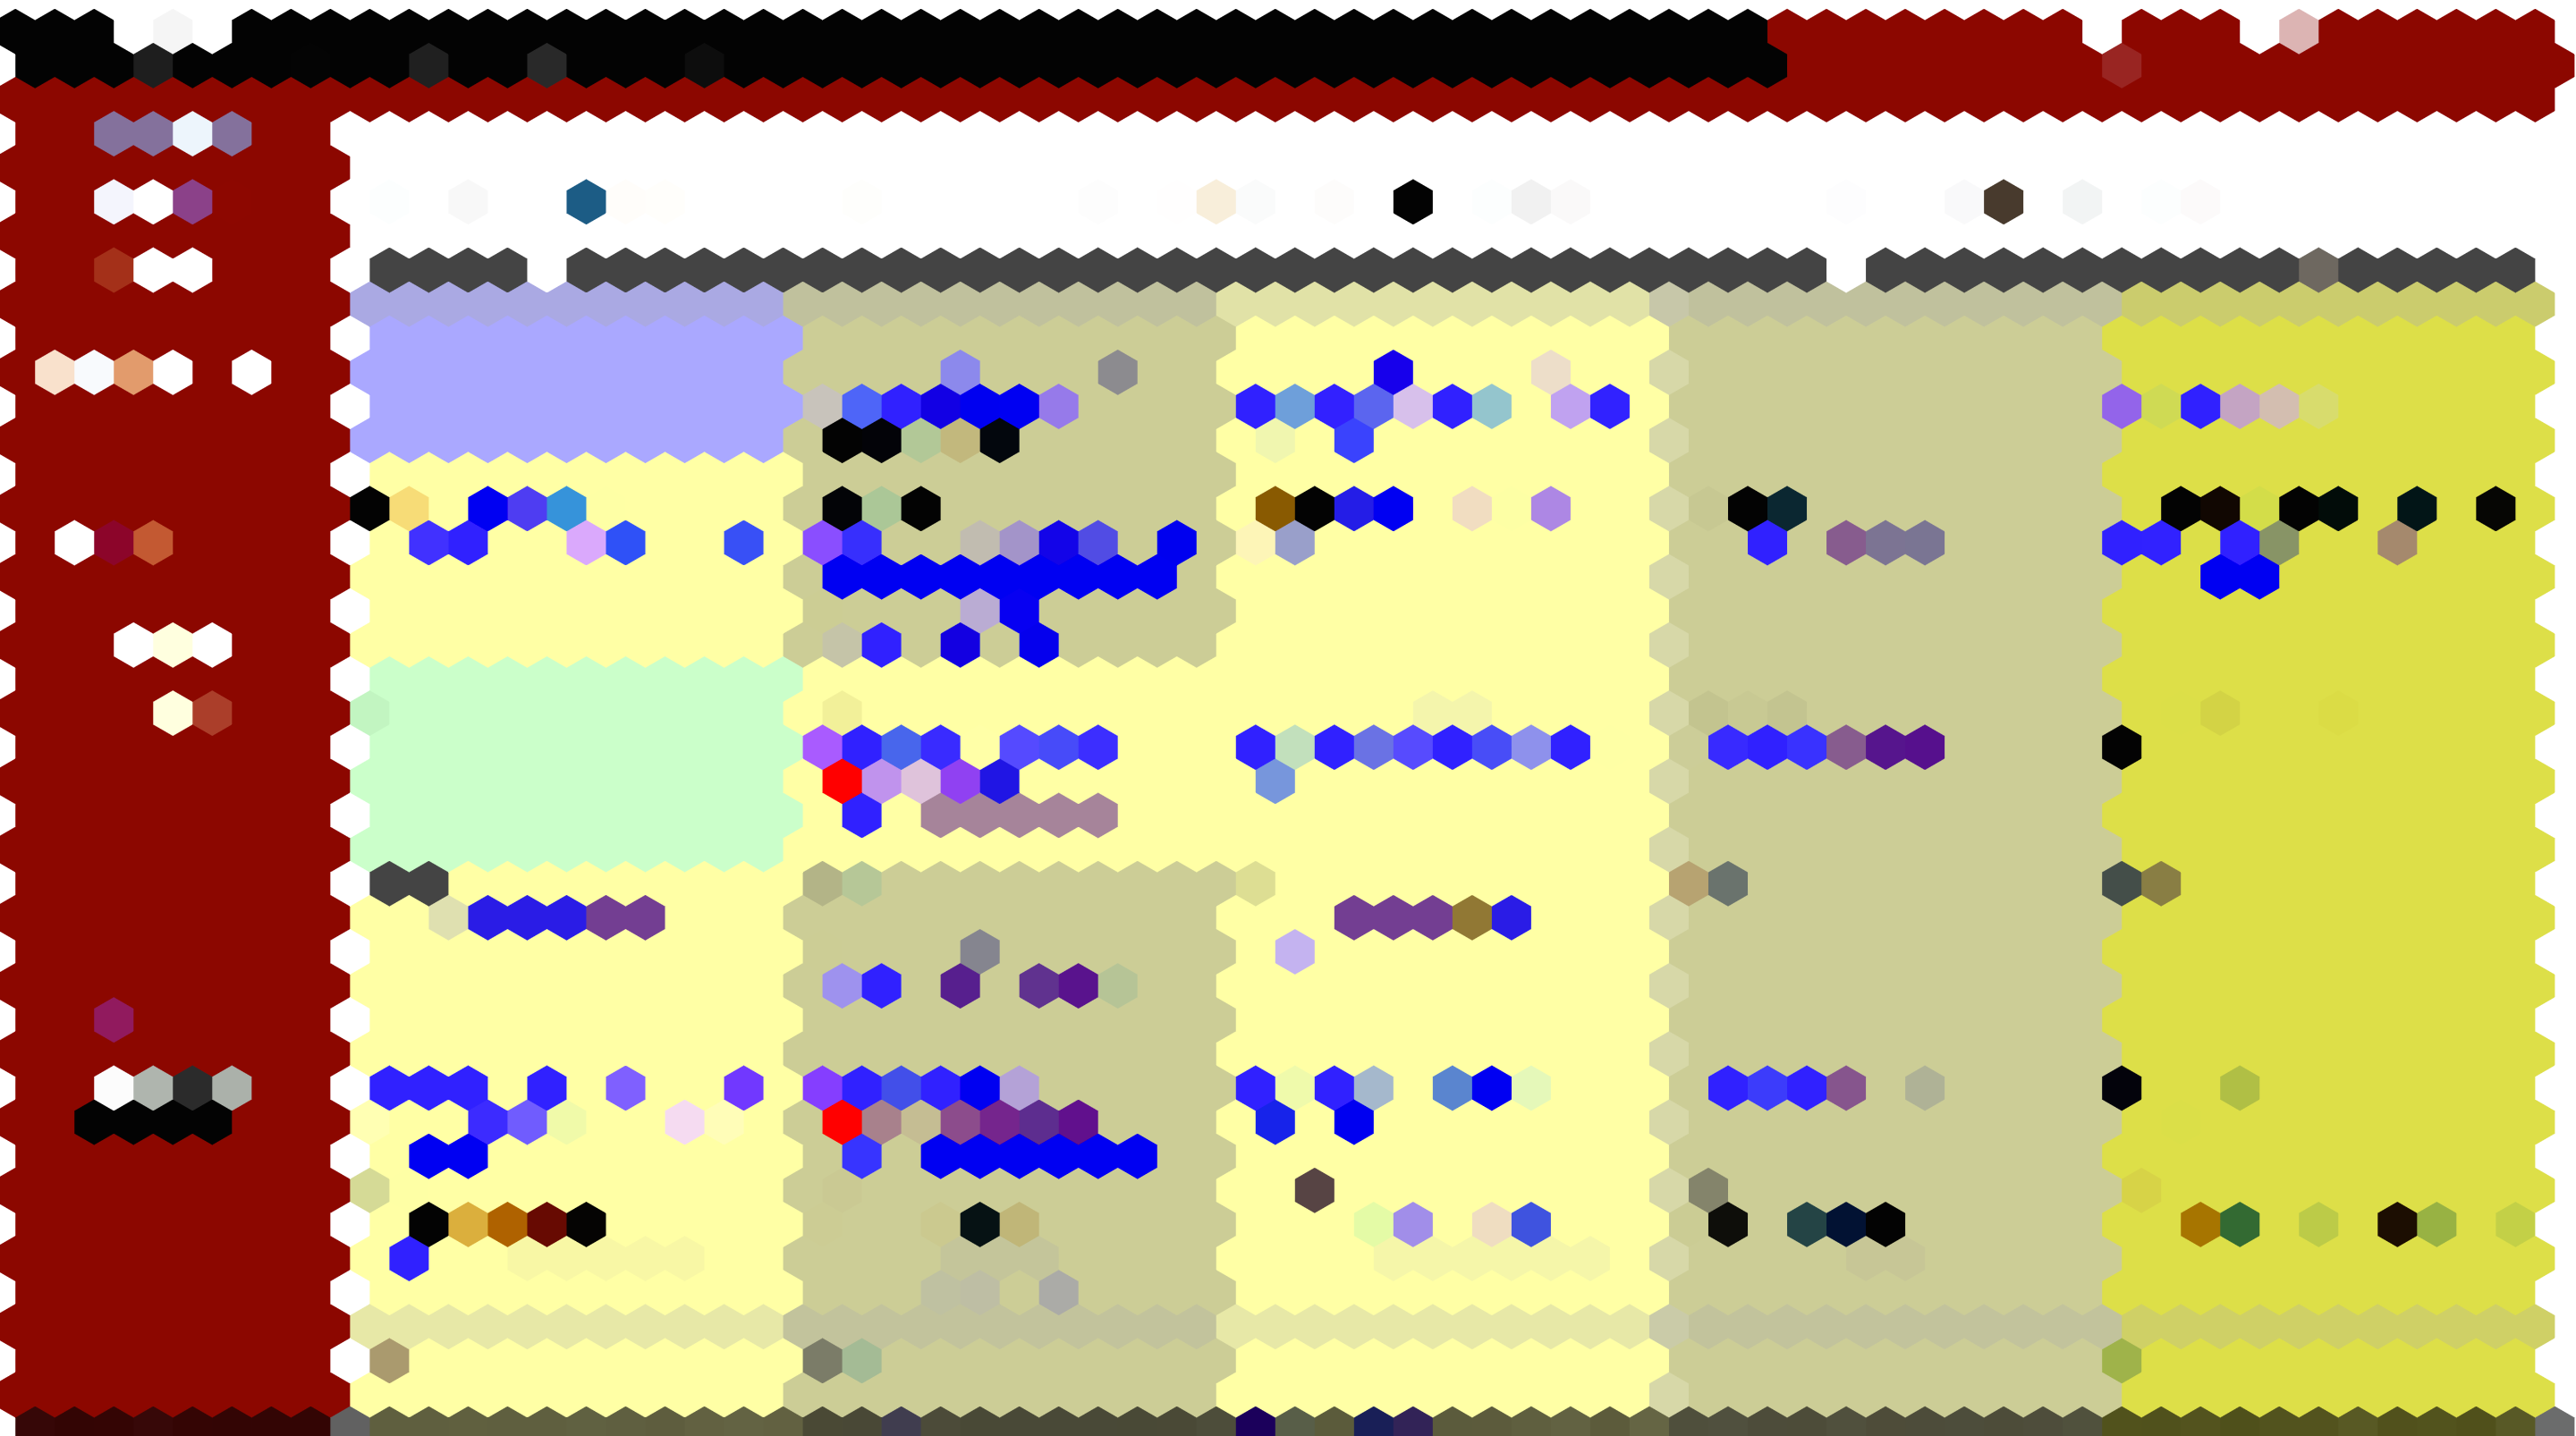 a pixelated screenshot of the page I stared at the
most